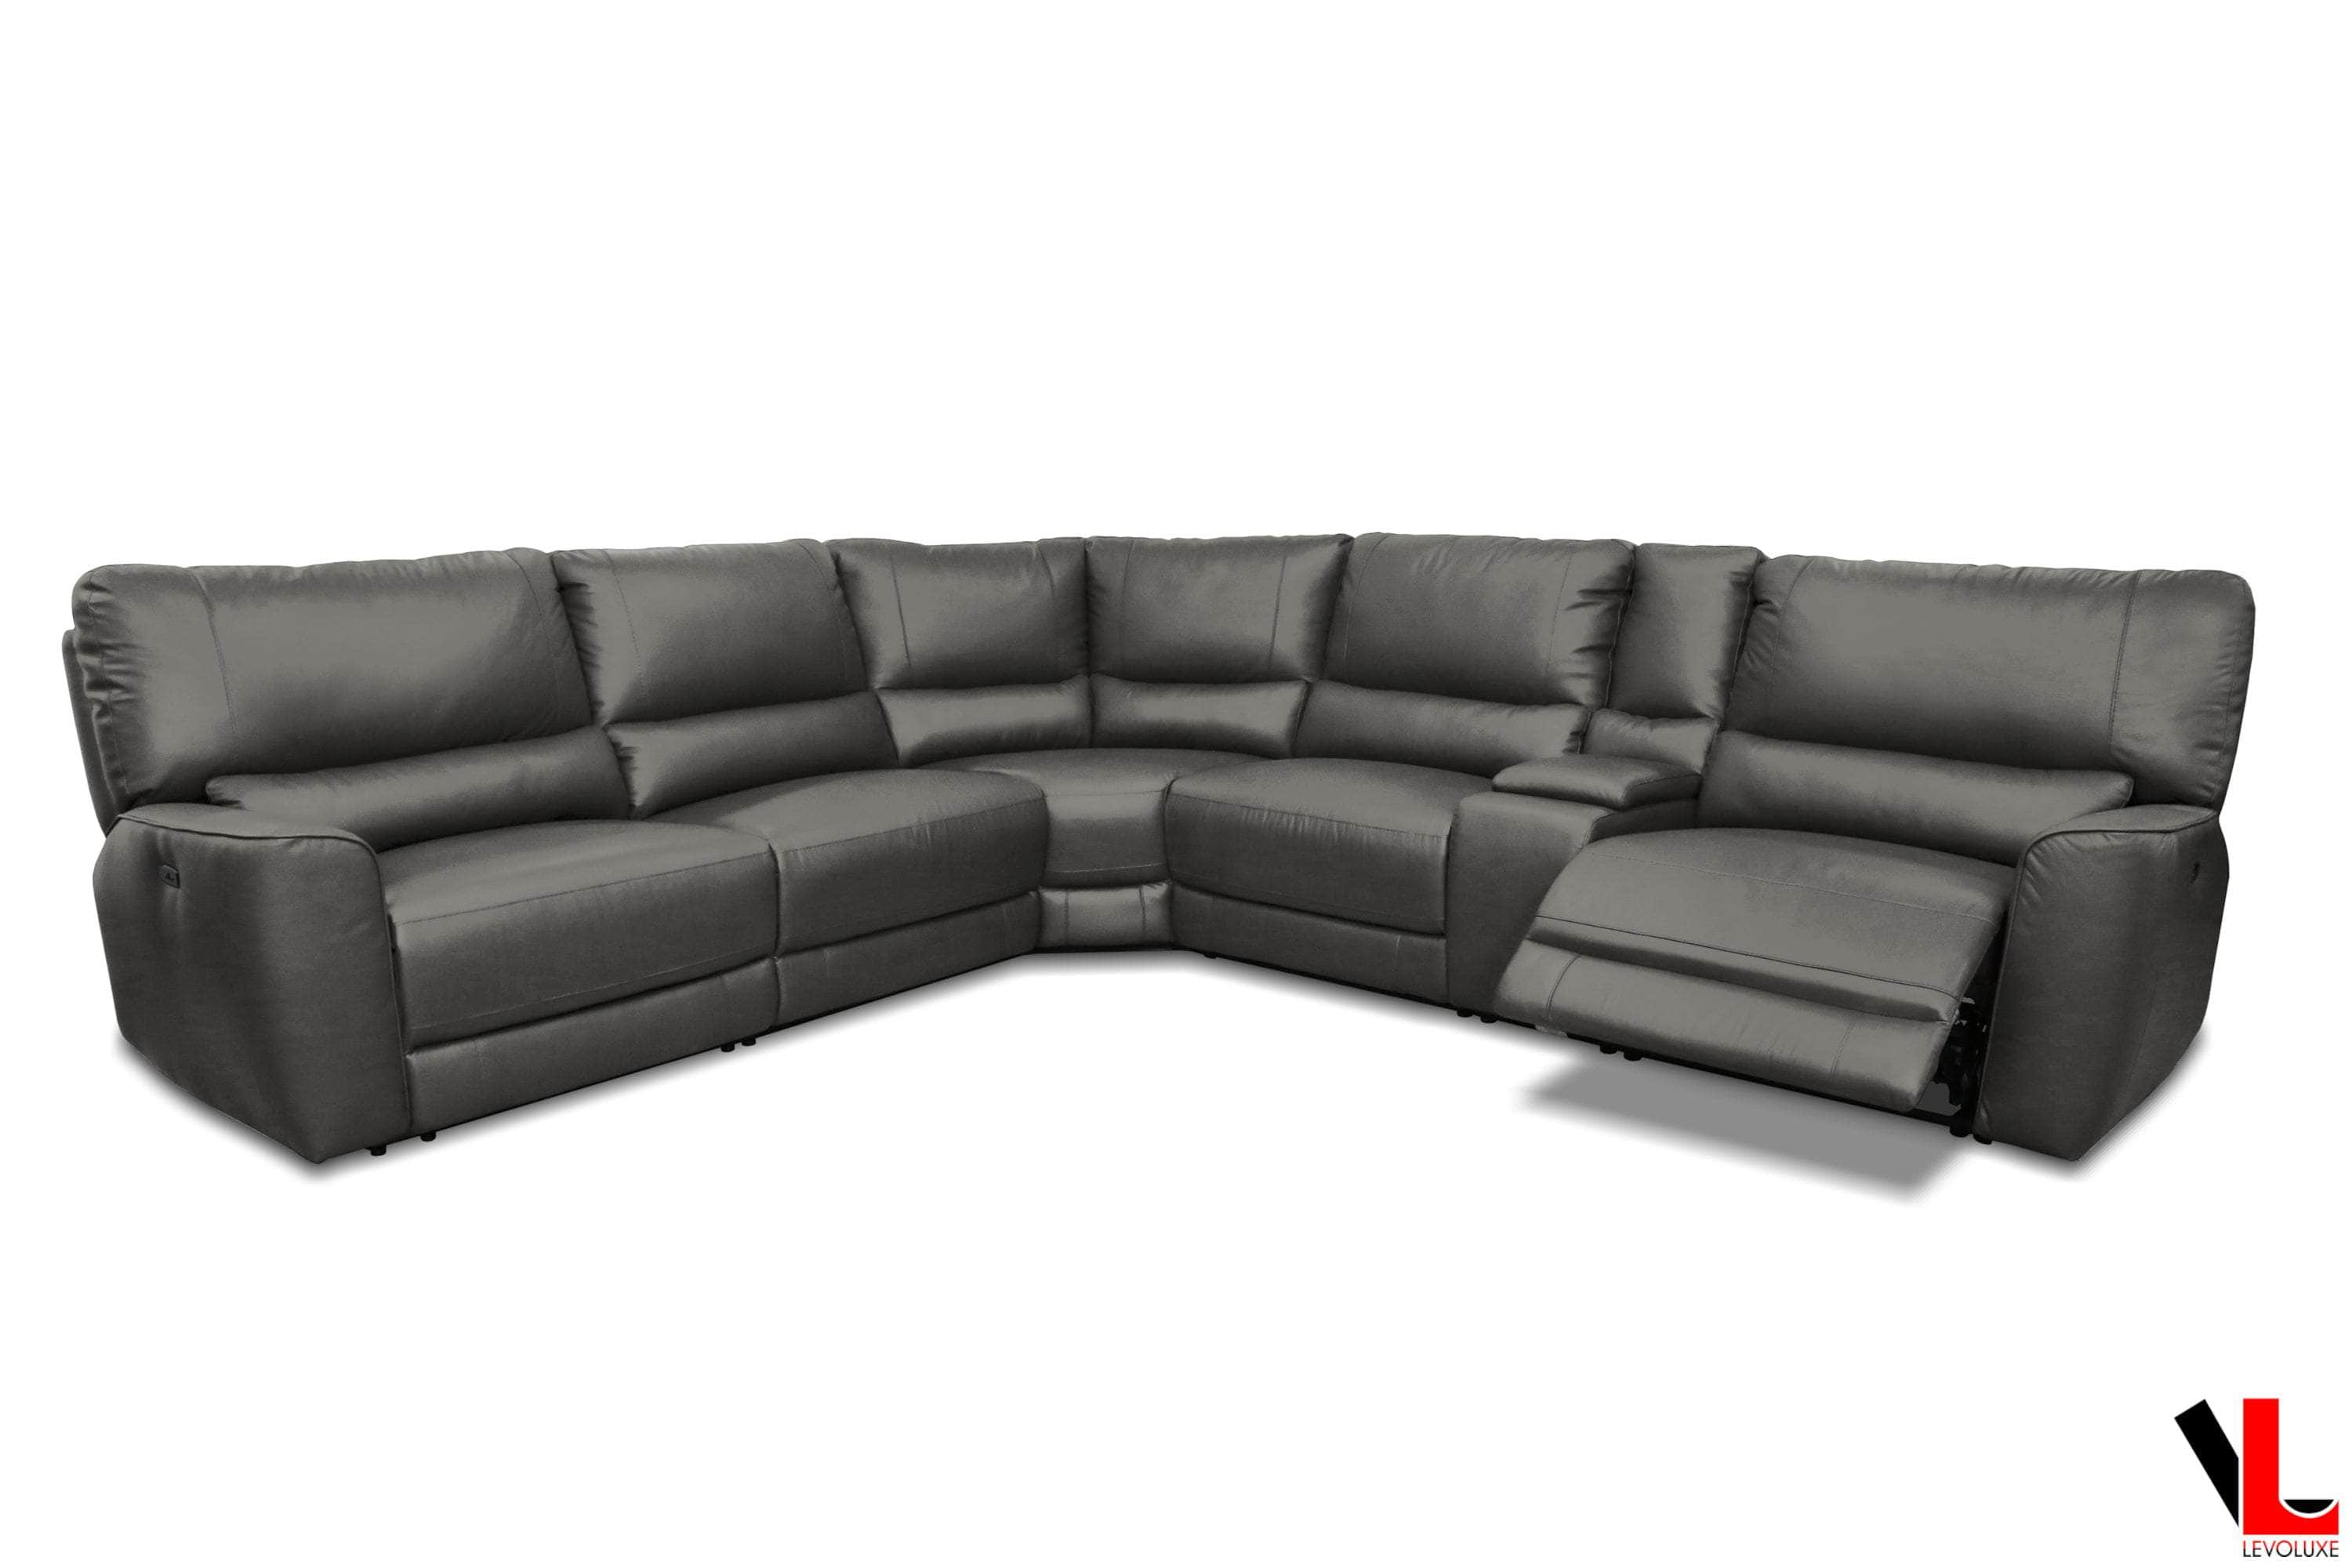 Levoluxe Sectional Atlas Corner Sectional Sofa with Console and Power Recliners in Ryder Grey Leather Match